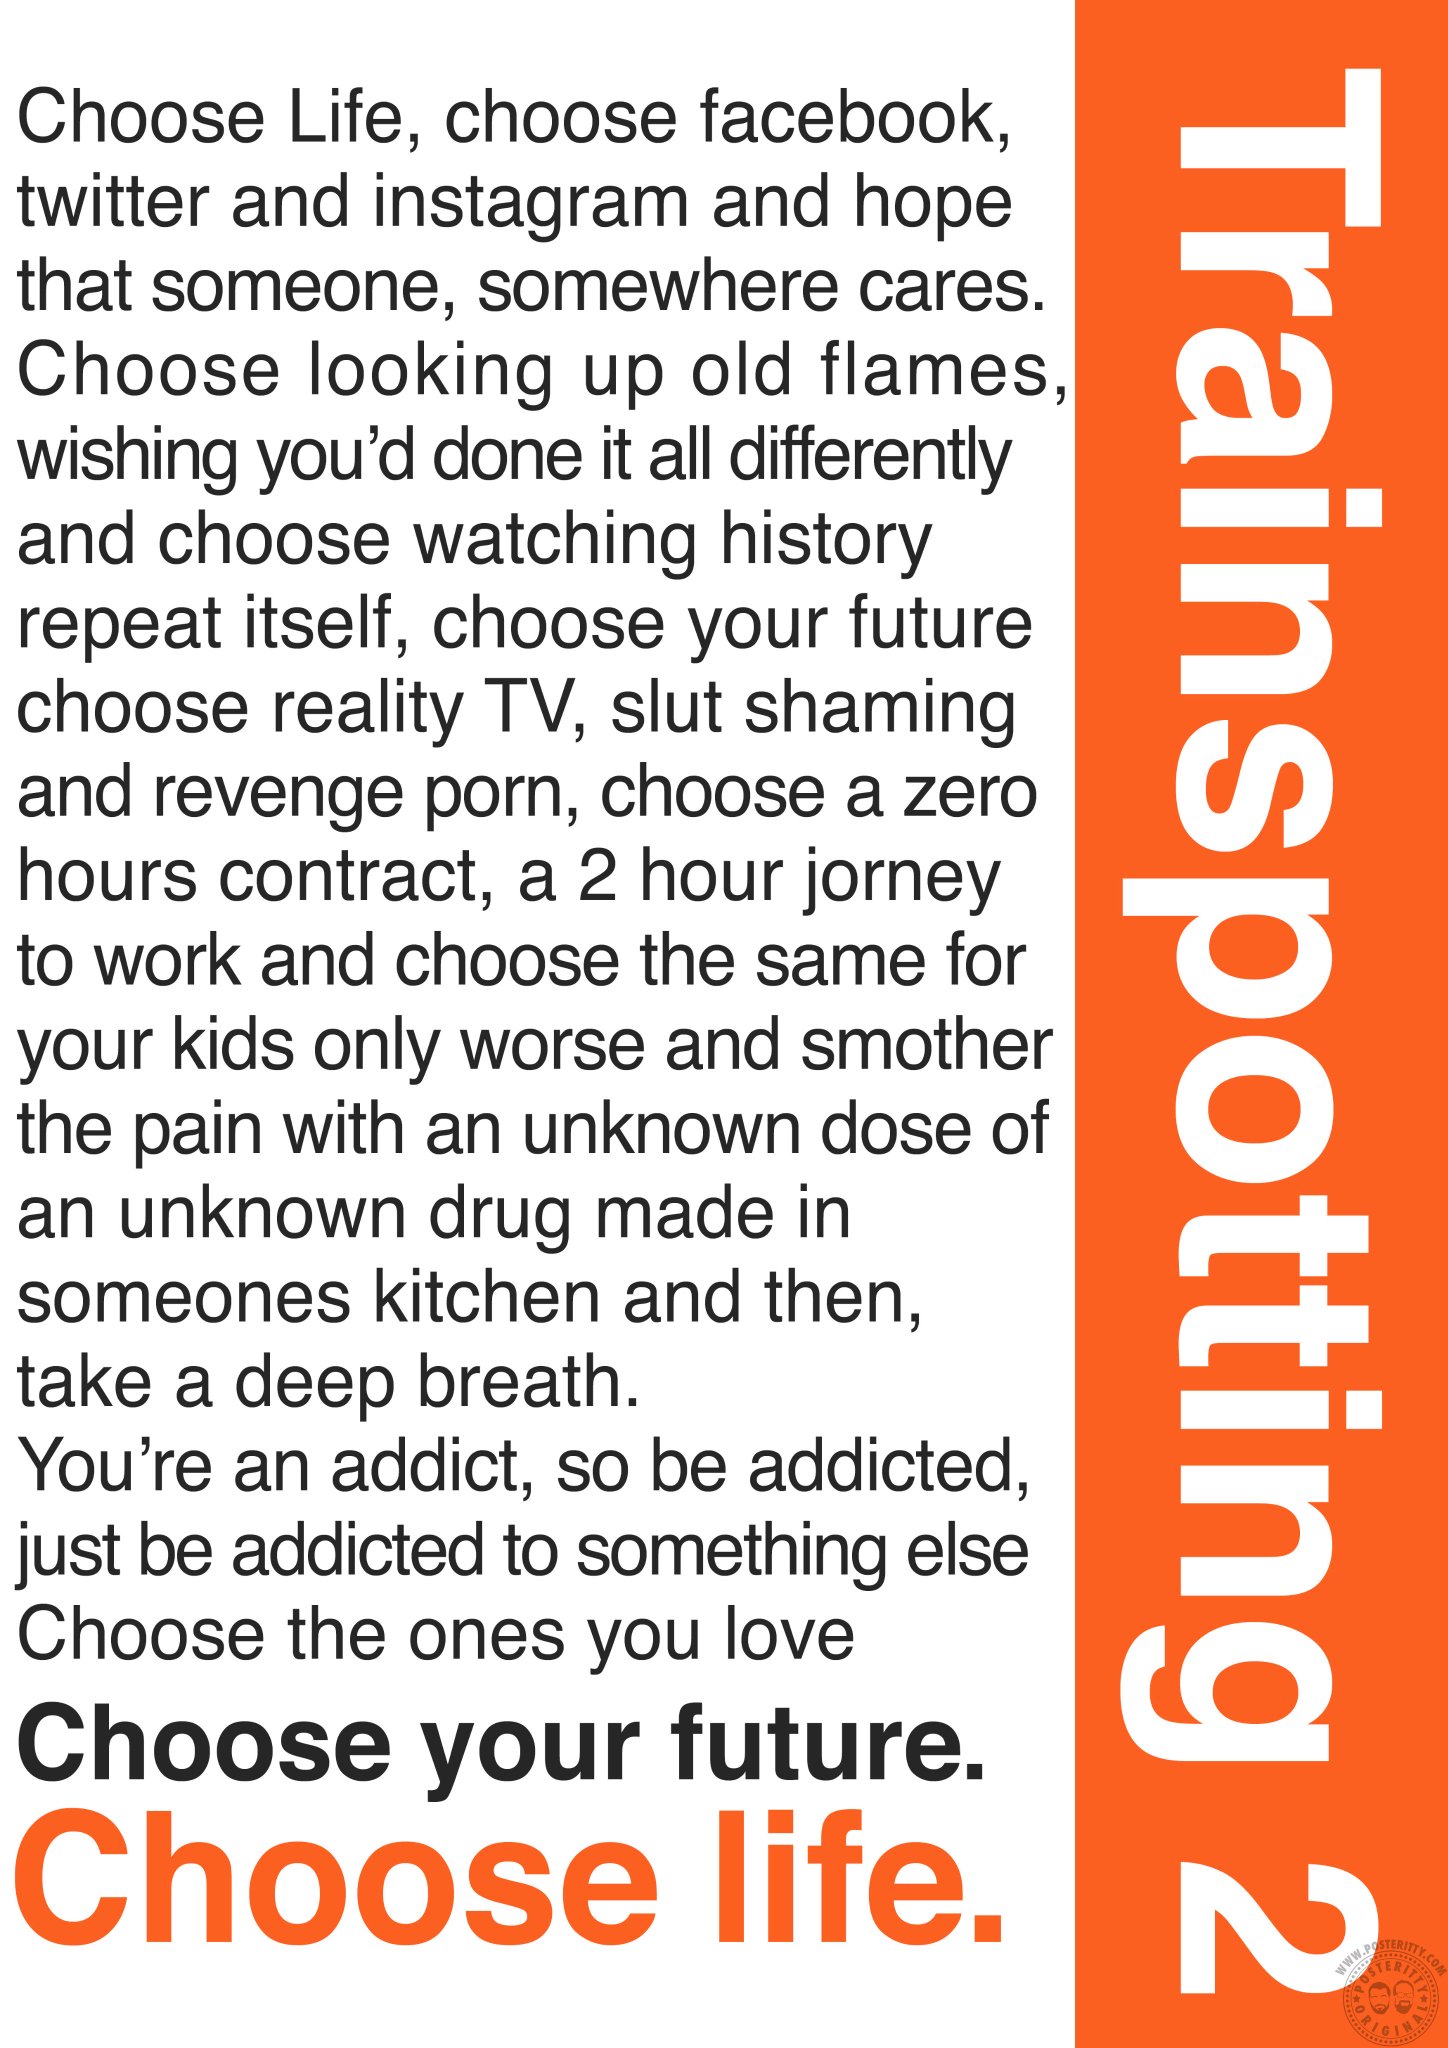 Posteritty on Twitter: "Just seen the Trainspotting 2 